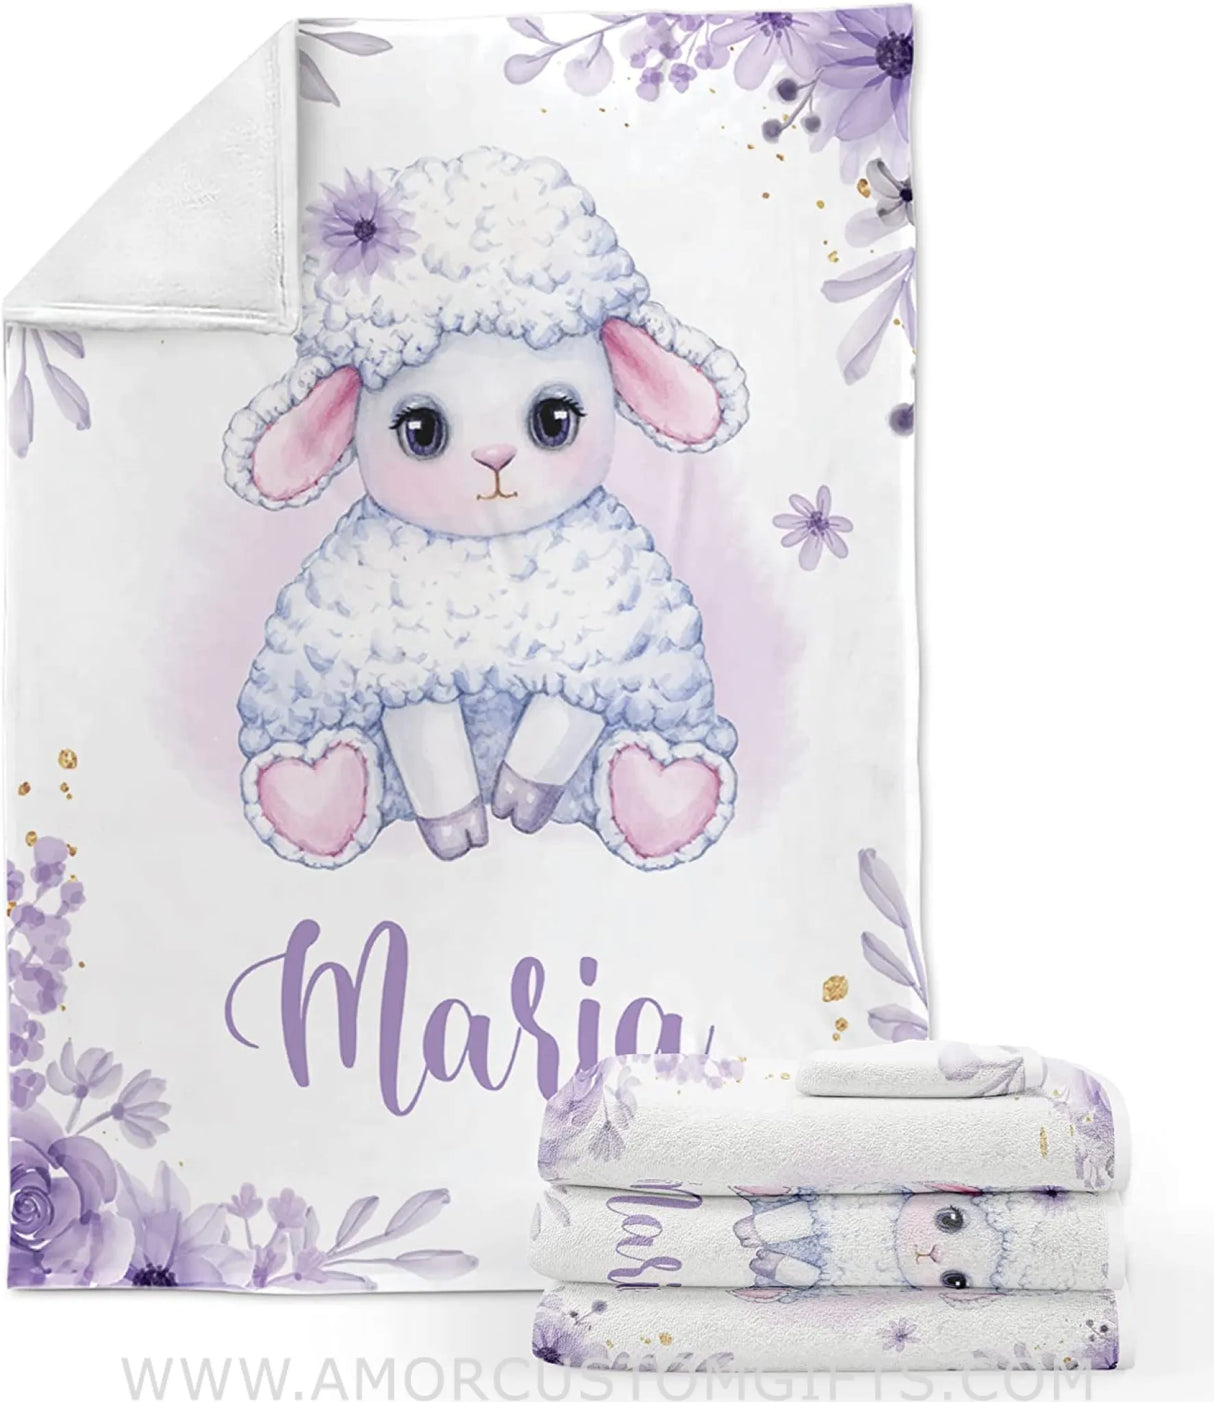 Blankets USA MADE Customized Baby Blankets - Sheep Baby Blanket, Best Gift for Baby, Newborn, New Mom, Super Soft Plush Fleece, 30 x 40 inch